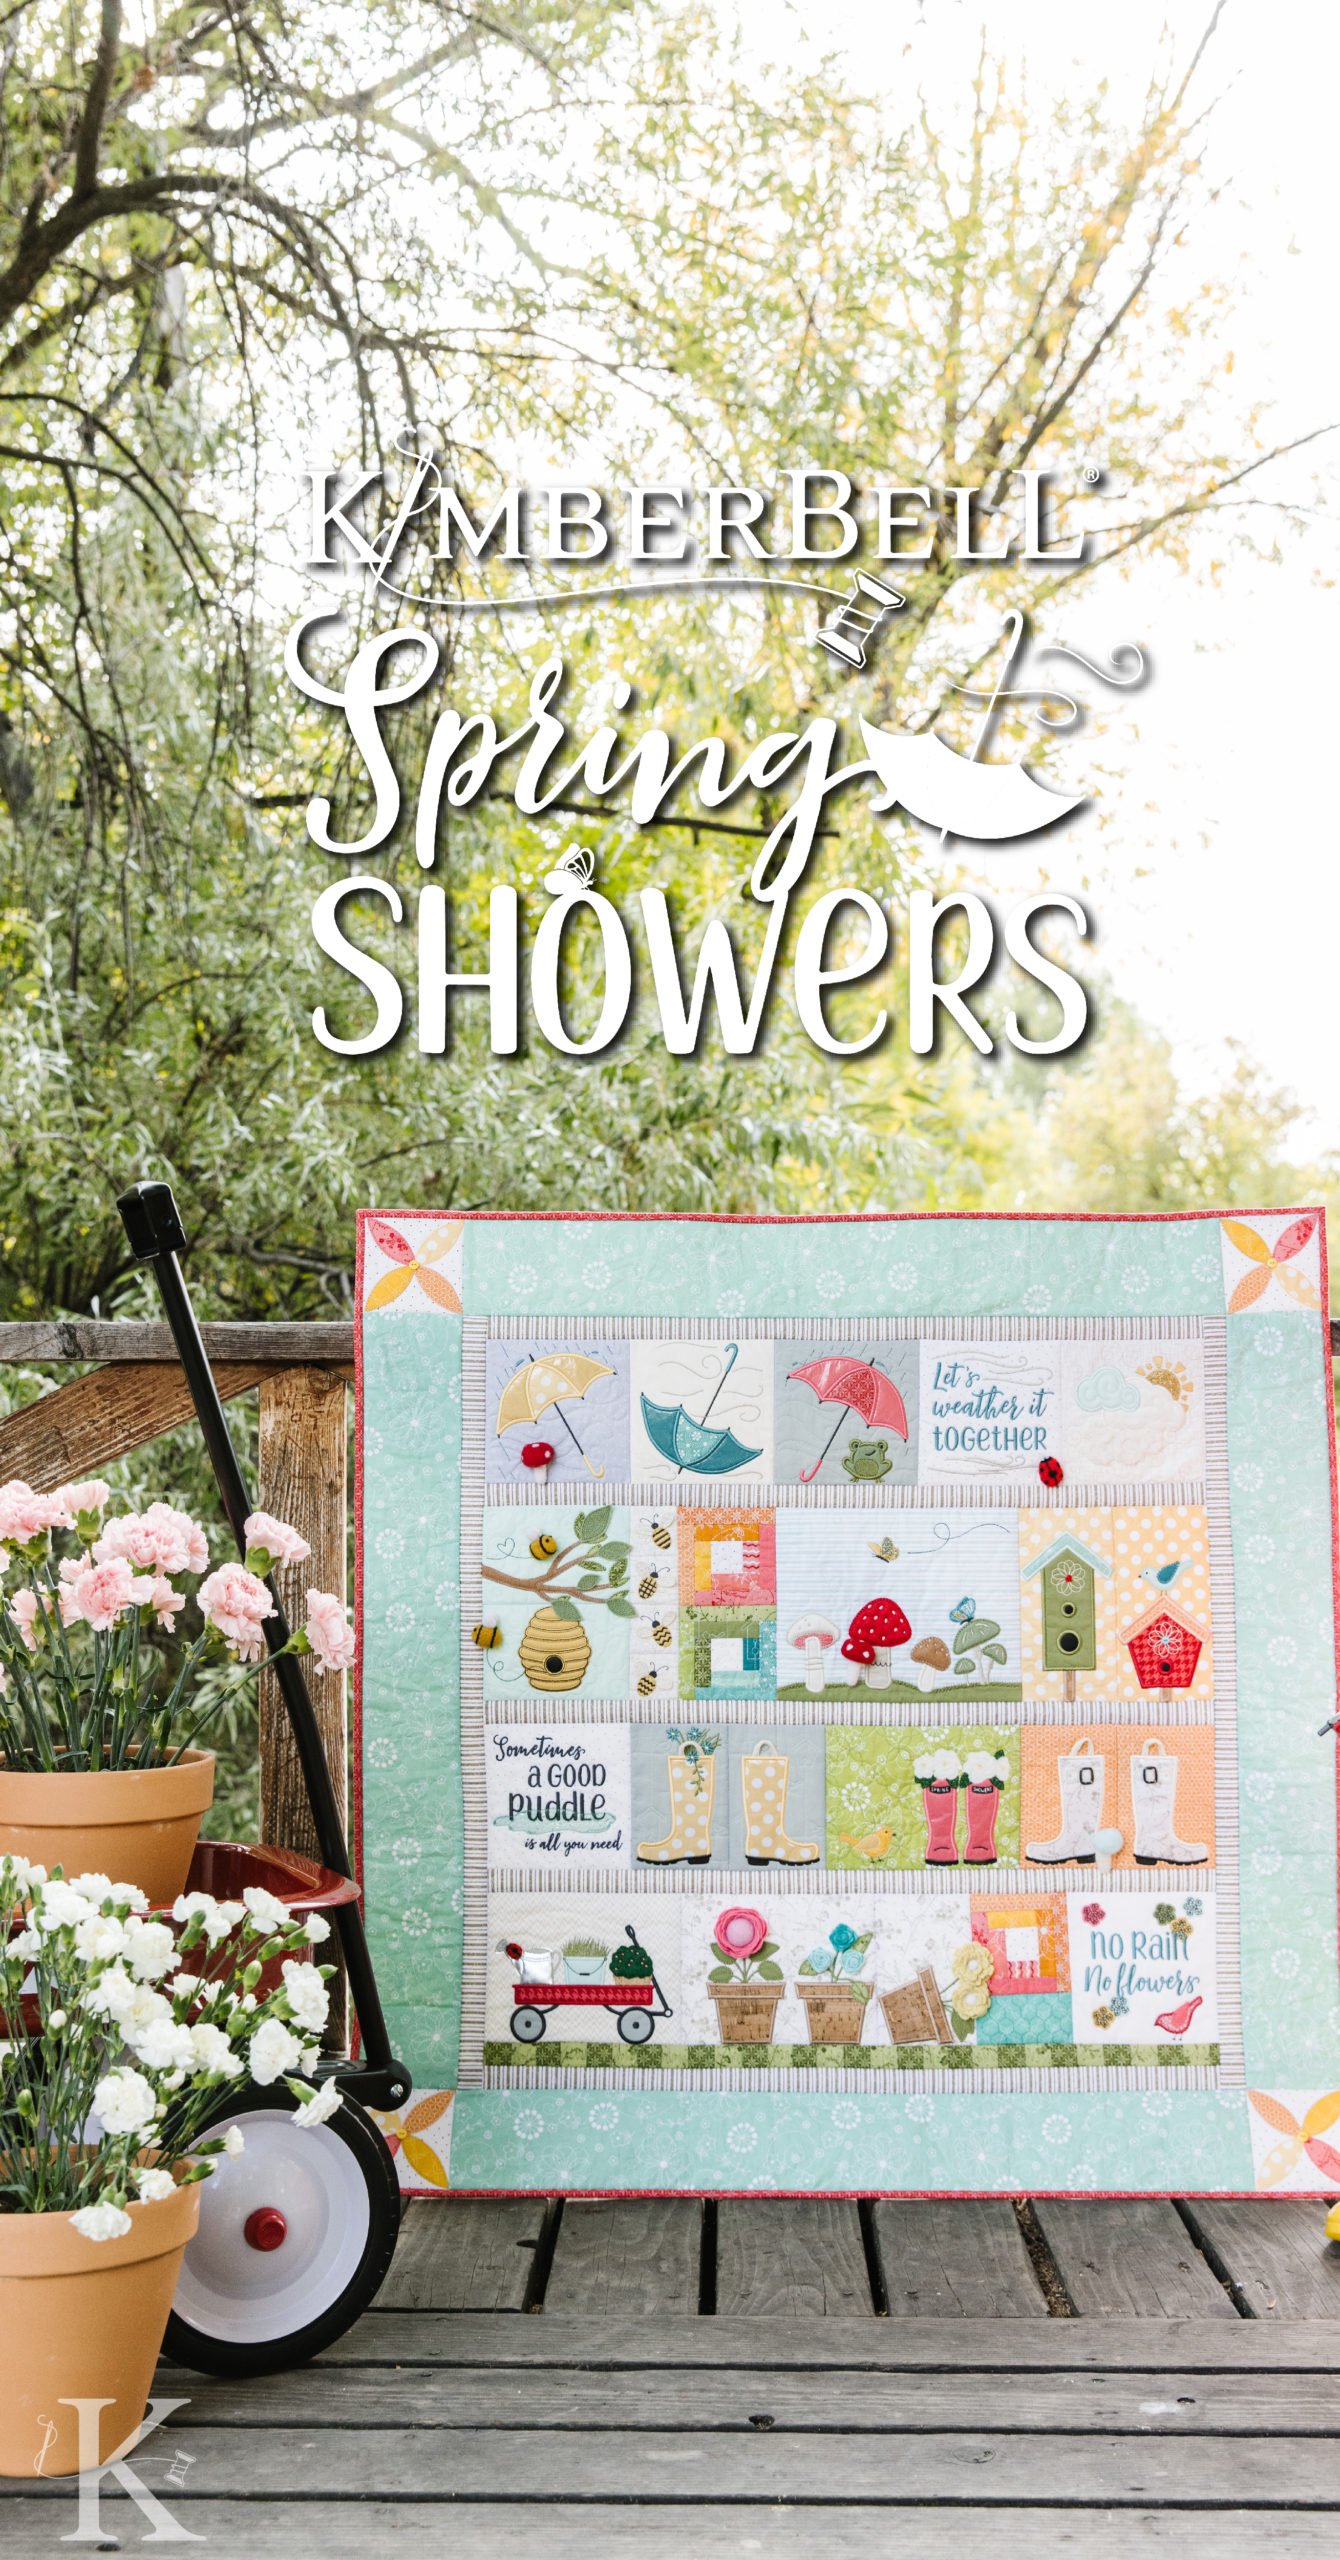 Kimberbell Spring Showers quilt for machine embroidery